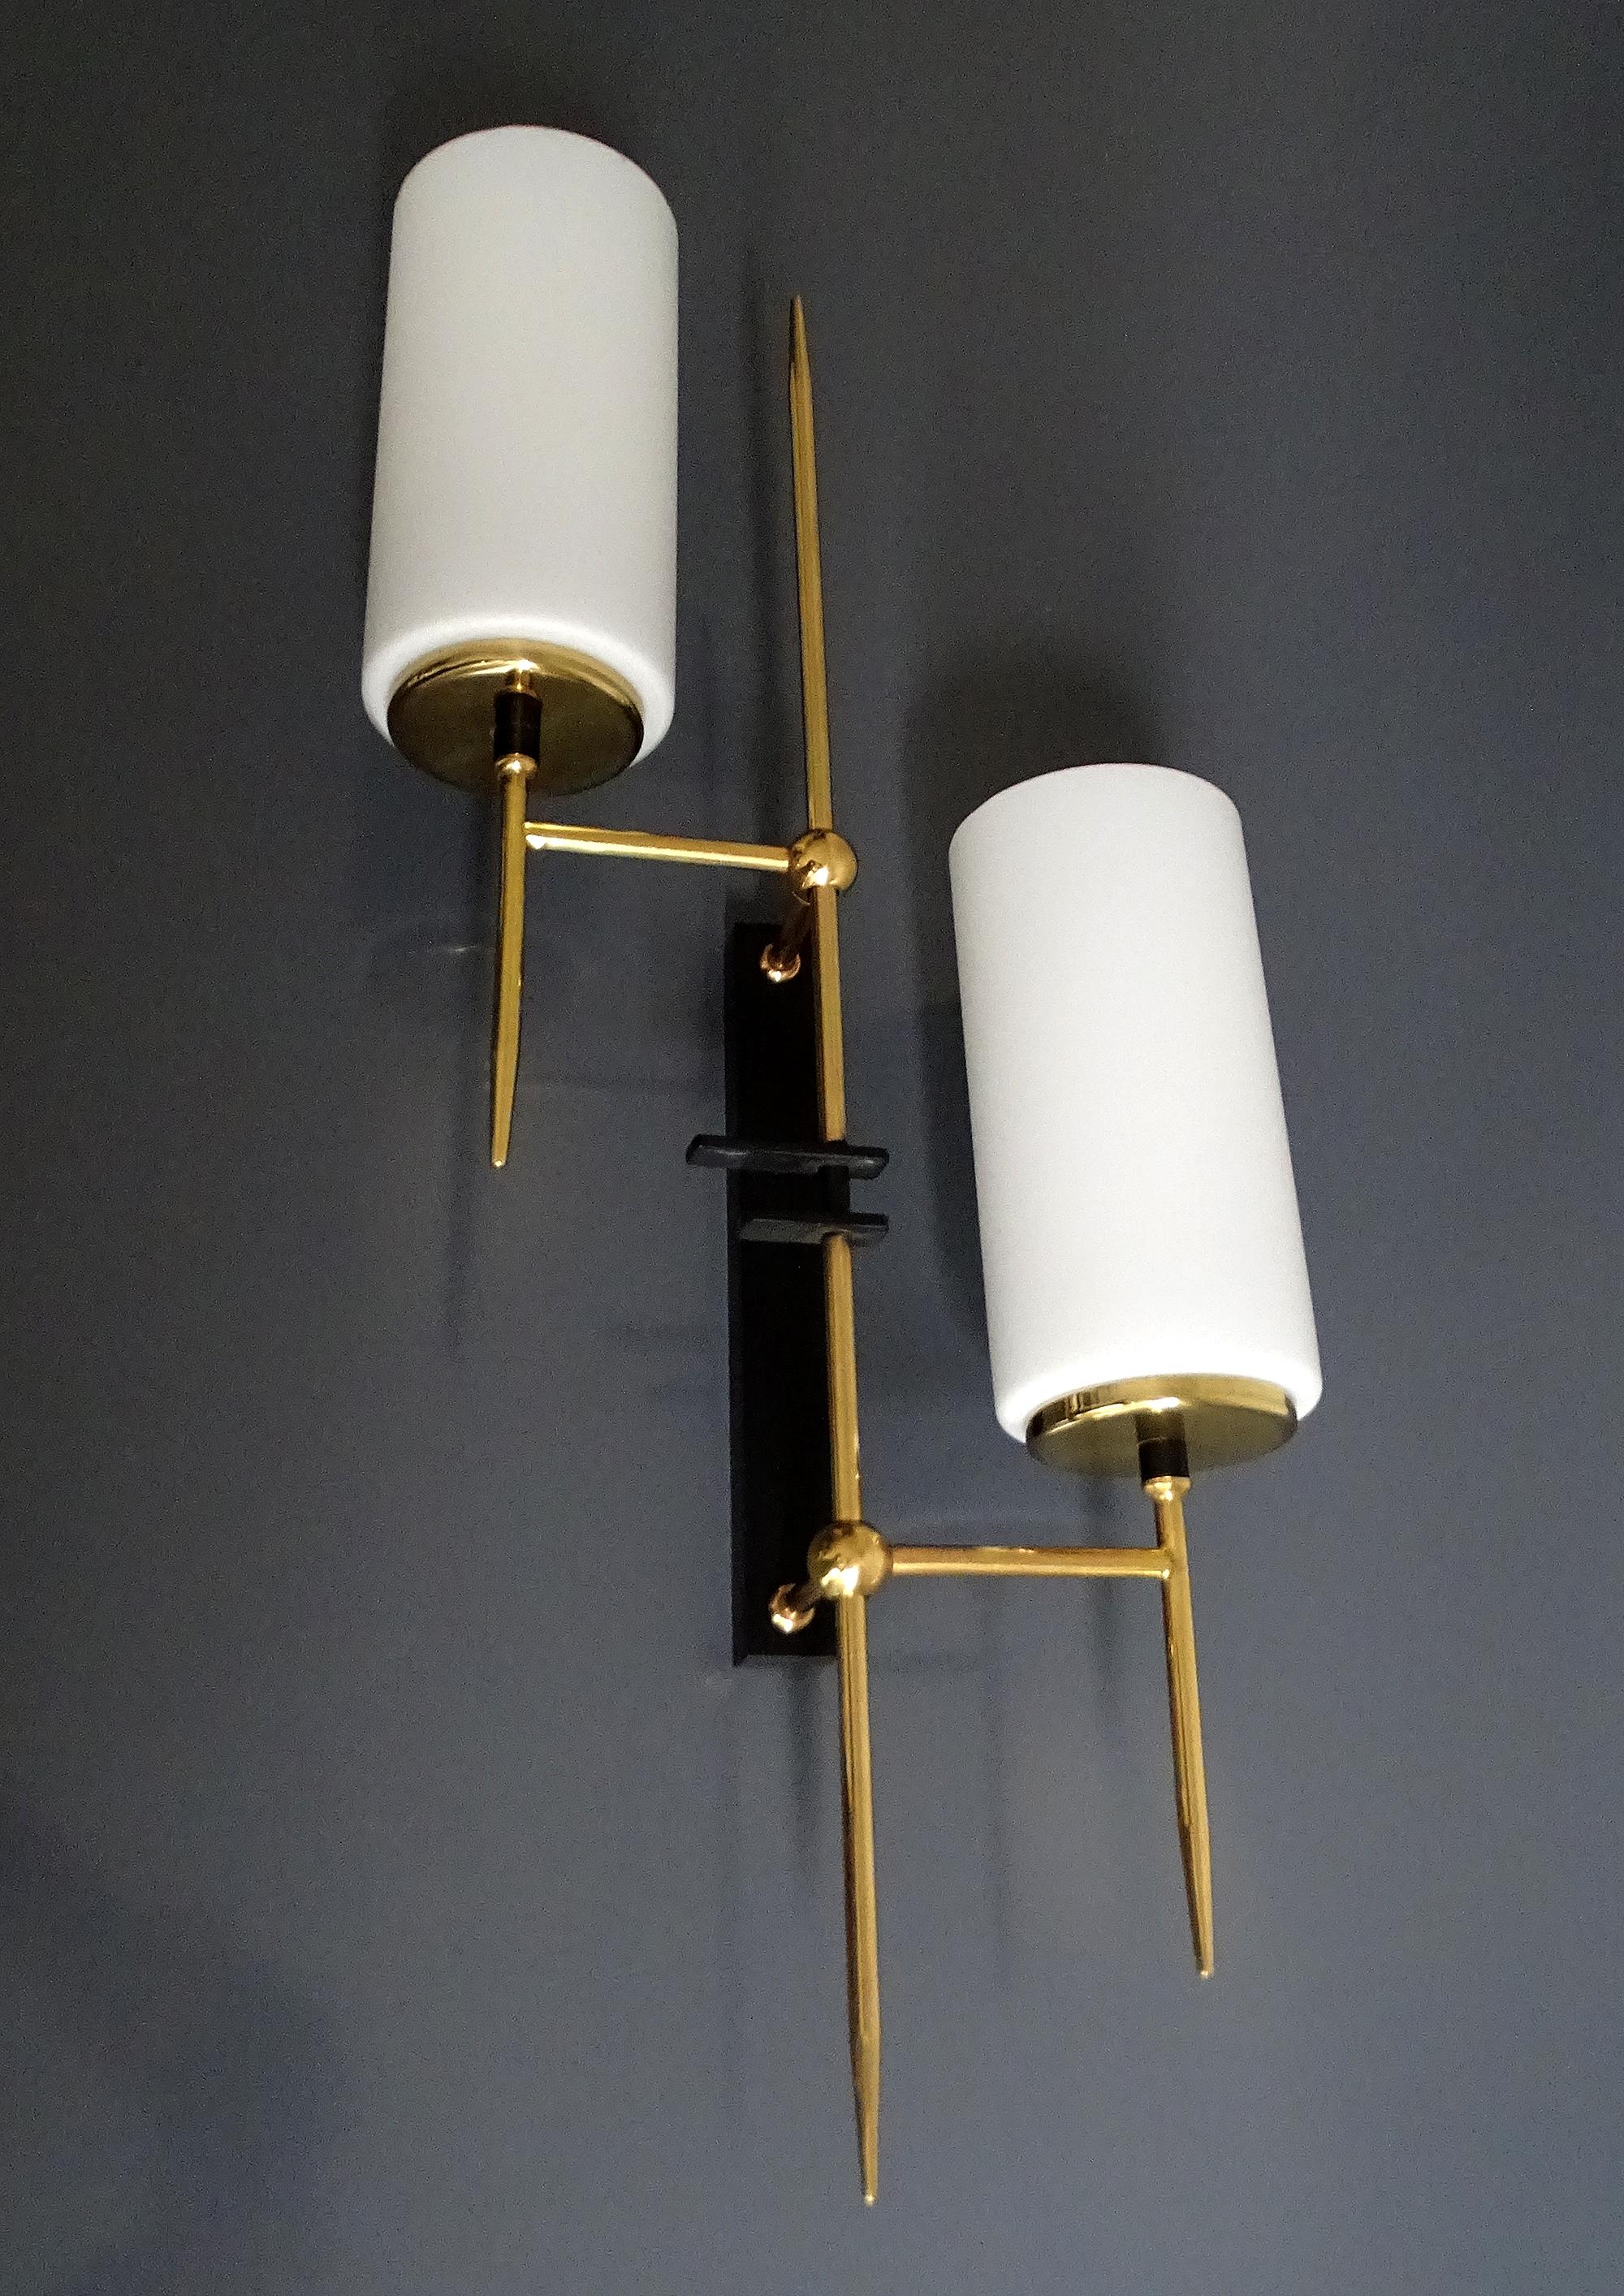 Exceptional  Pair of Large Brass Glass Sconces, France, 1960s, Stilnovo Style For Sale 1